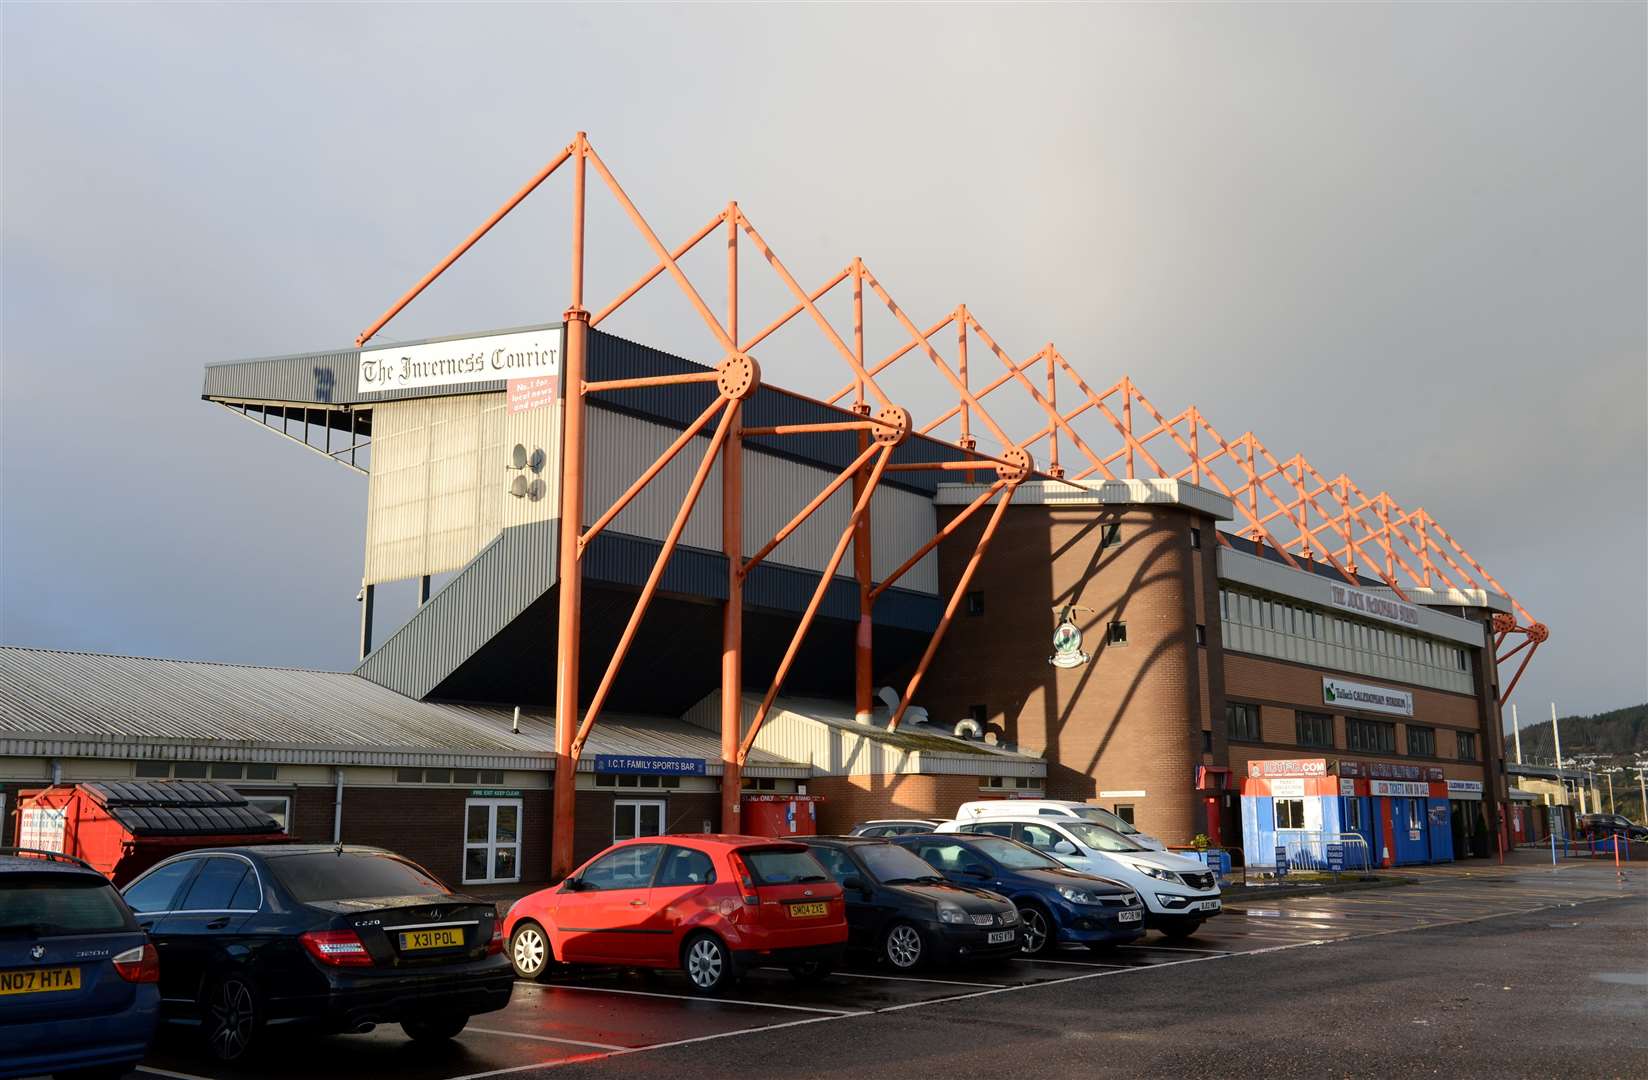 The Caledonian Stadium in Inverness, where a pitch inspection will take place at 12.30pm today.